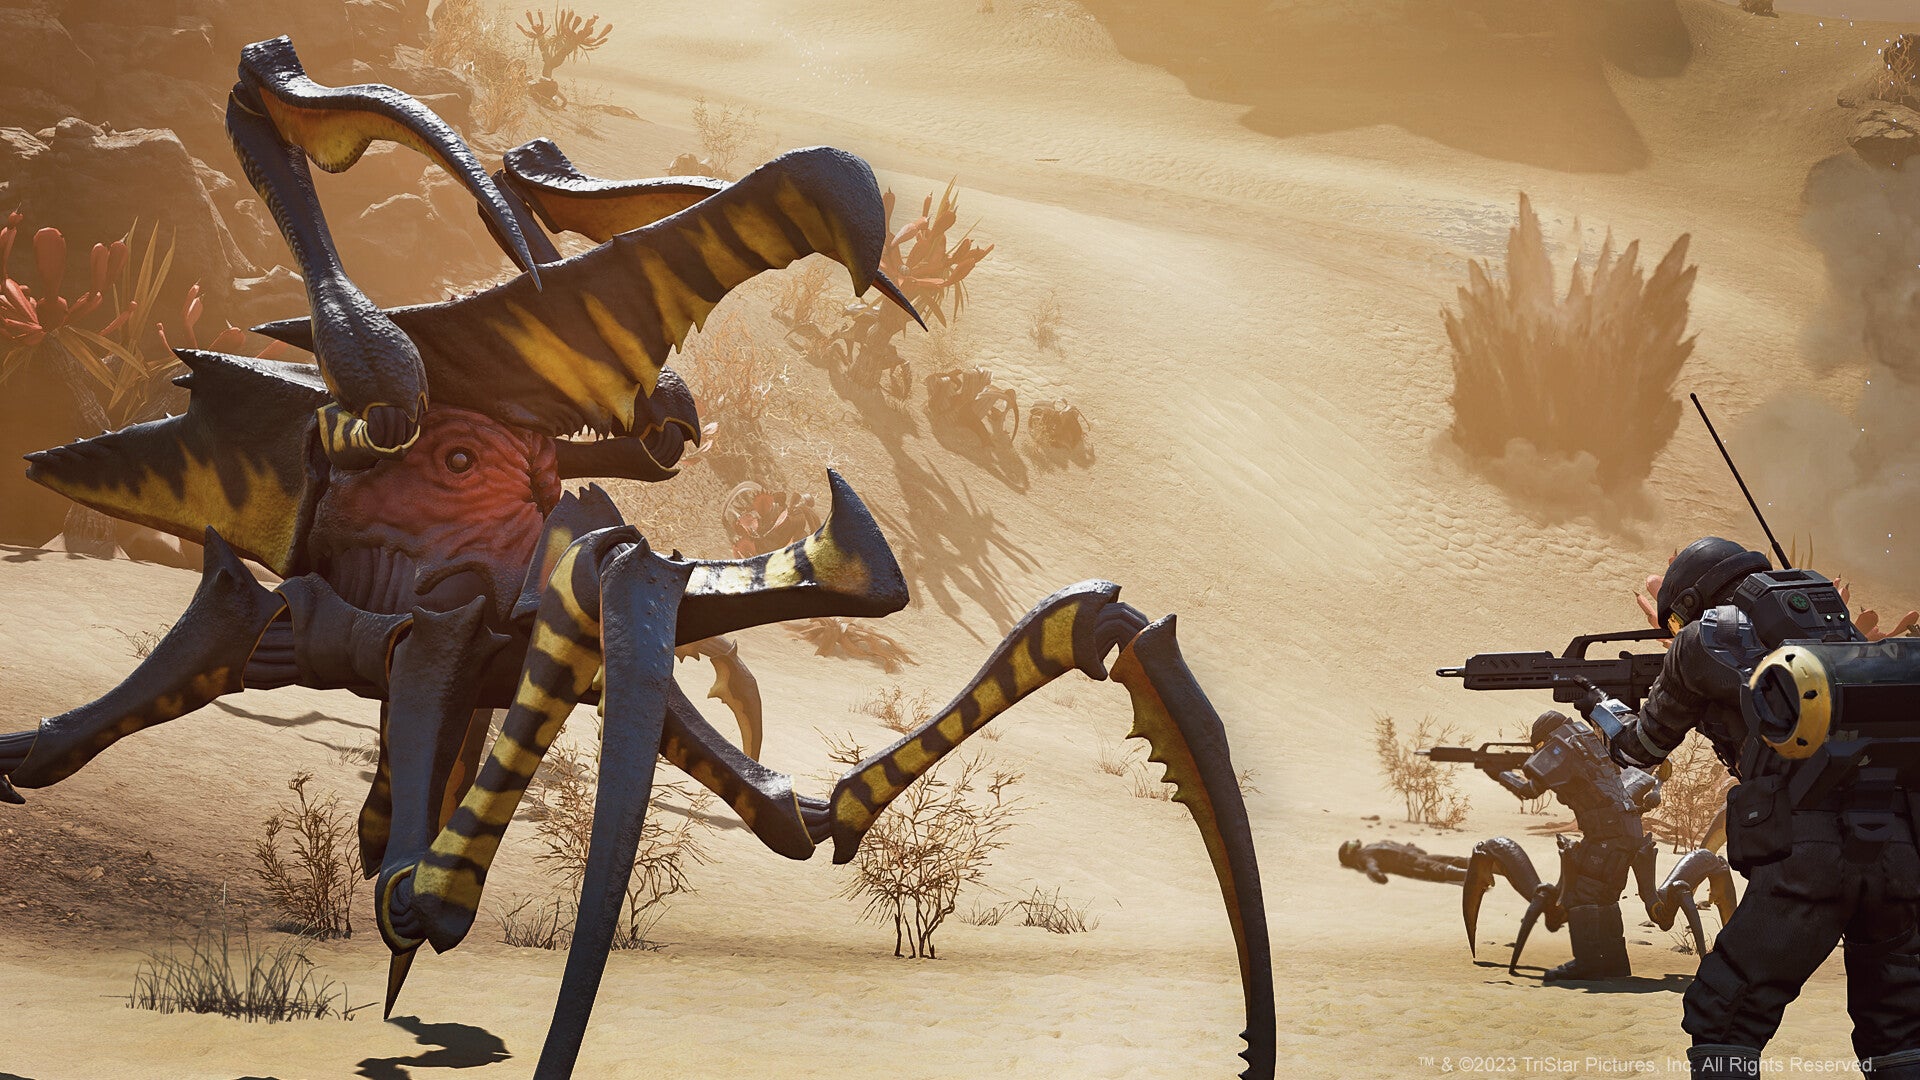 Insectos en 'Starship Troopers: Invasion